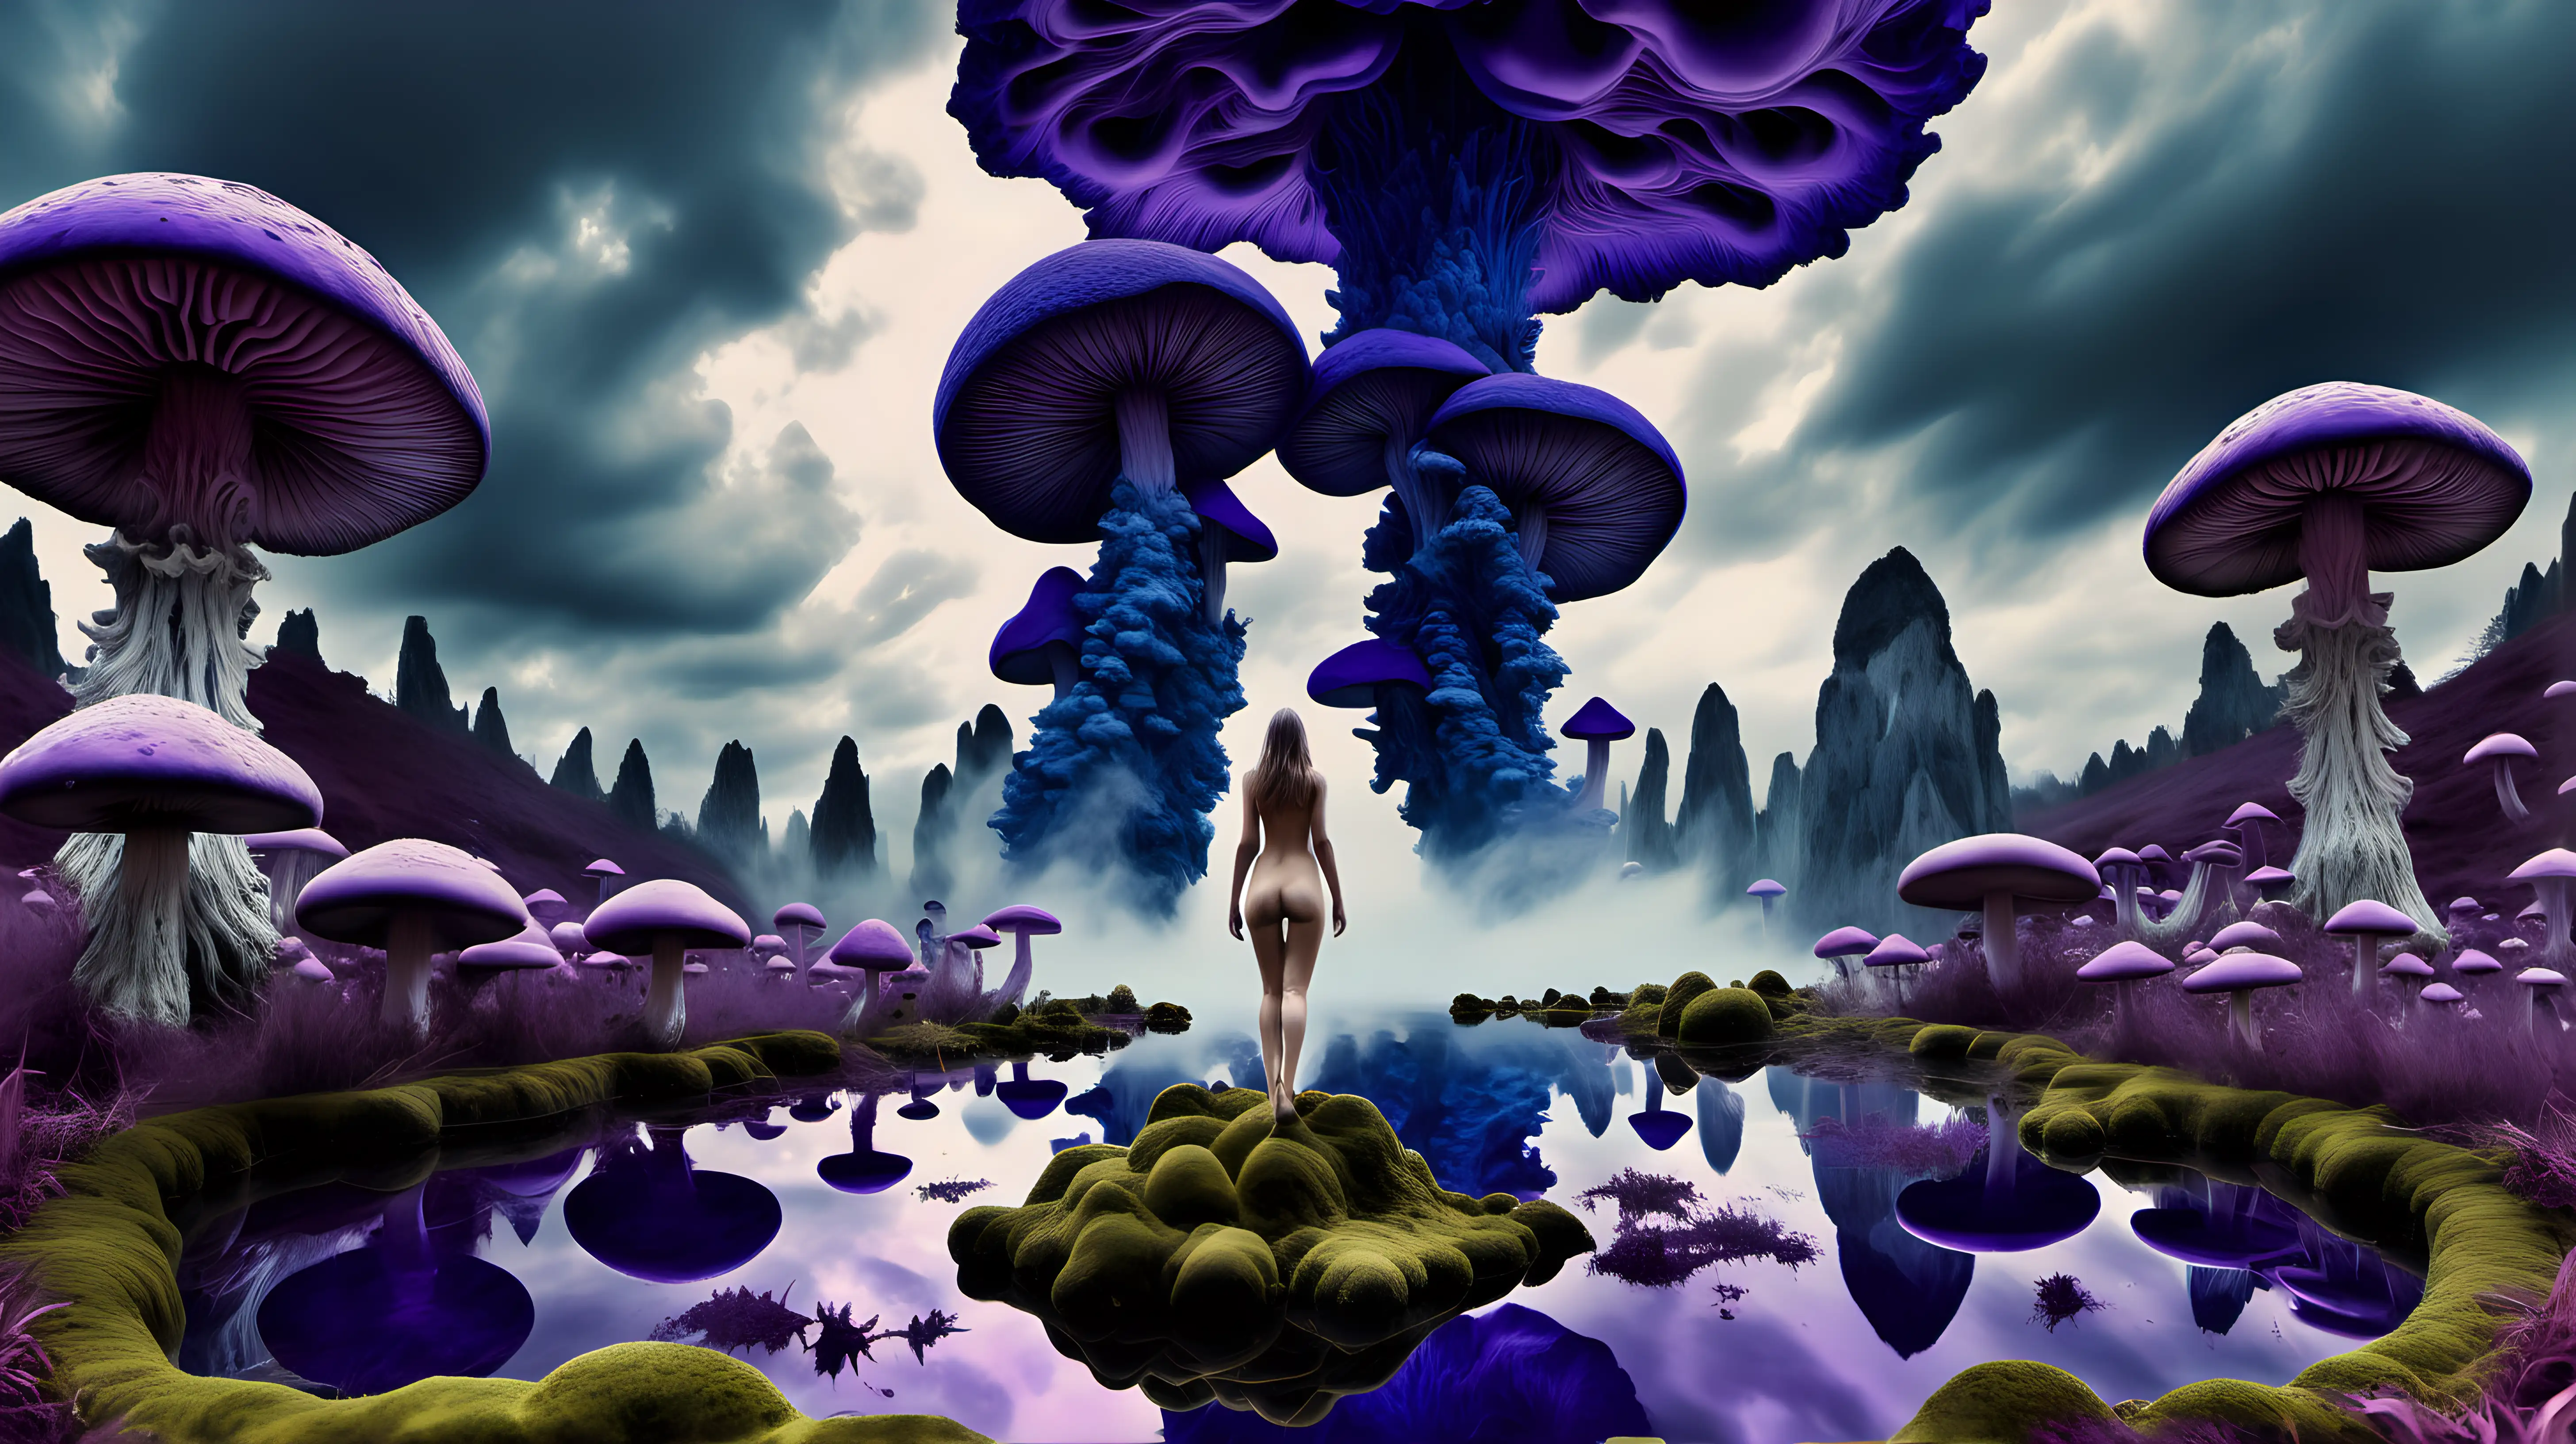 Mystical Ascension Nude Woman Amidst Psychedelic Mineral Clouds and Mushroom Landscape